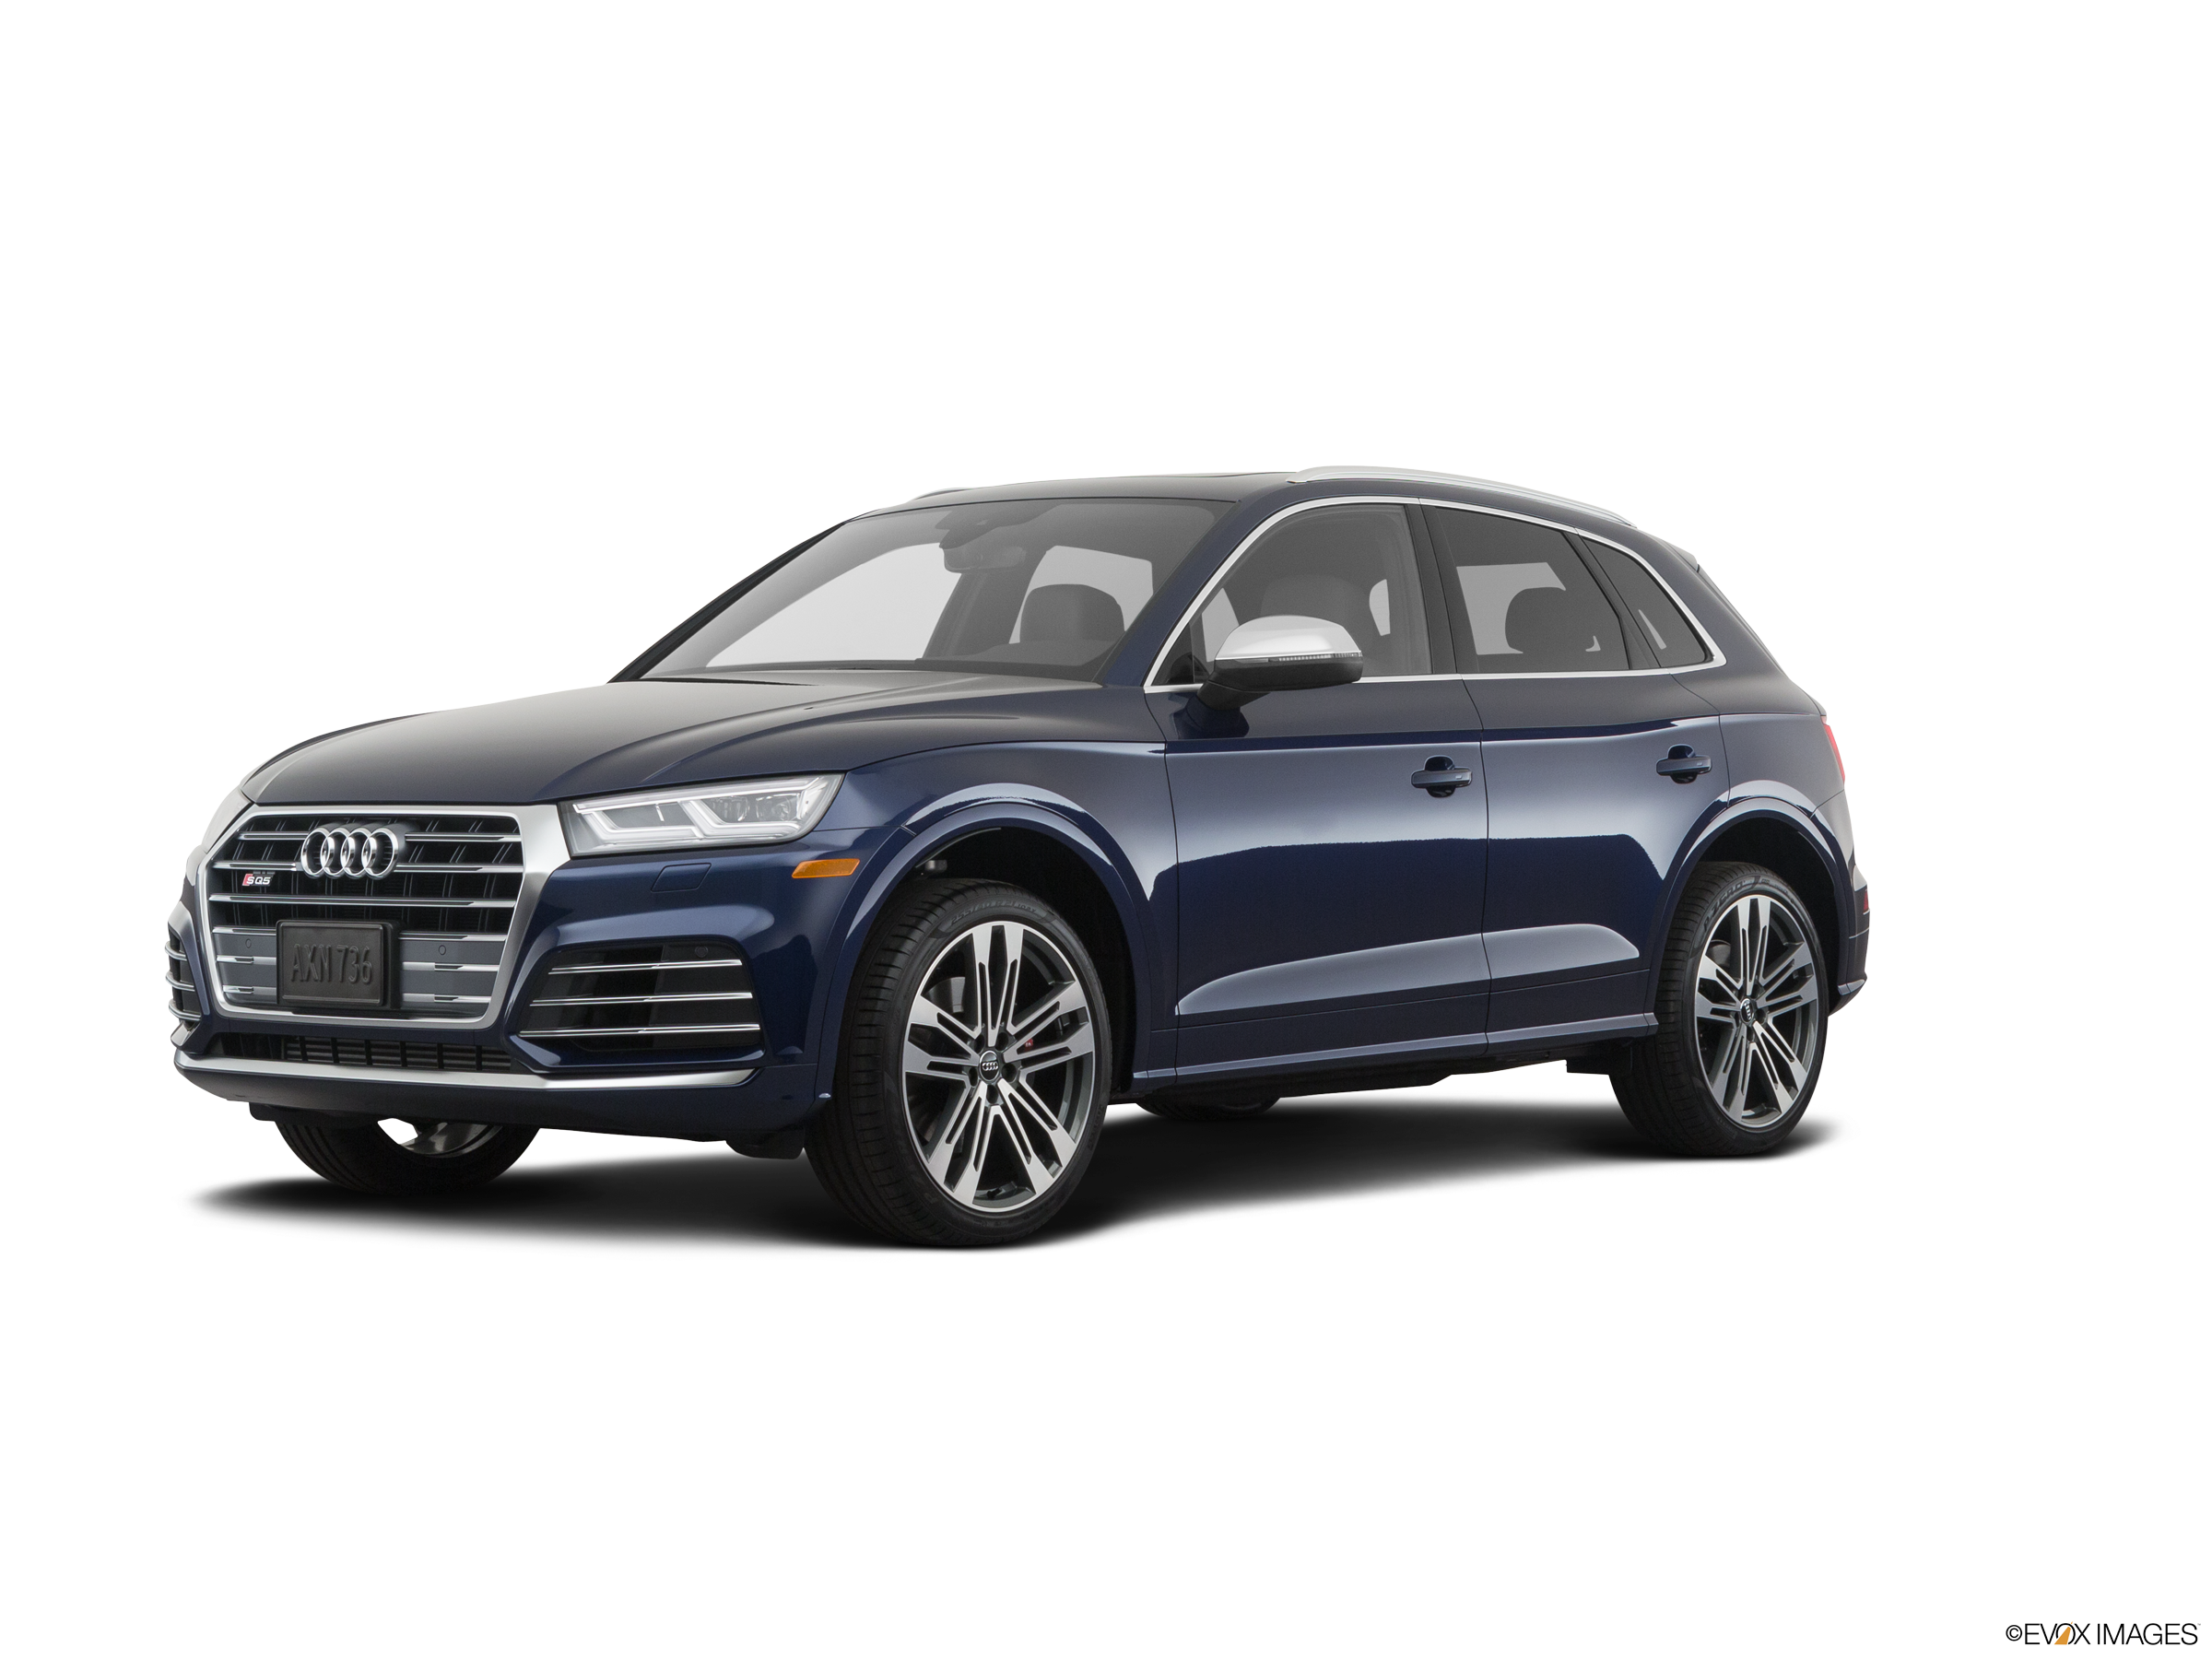 Front Suv View Audi PNG Image High Quality PNG Image